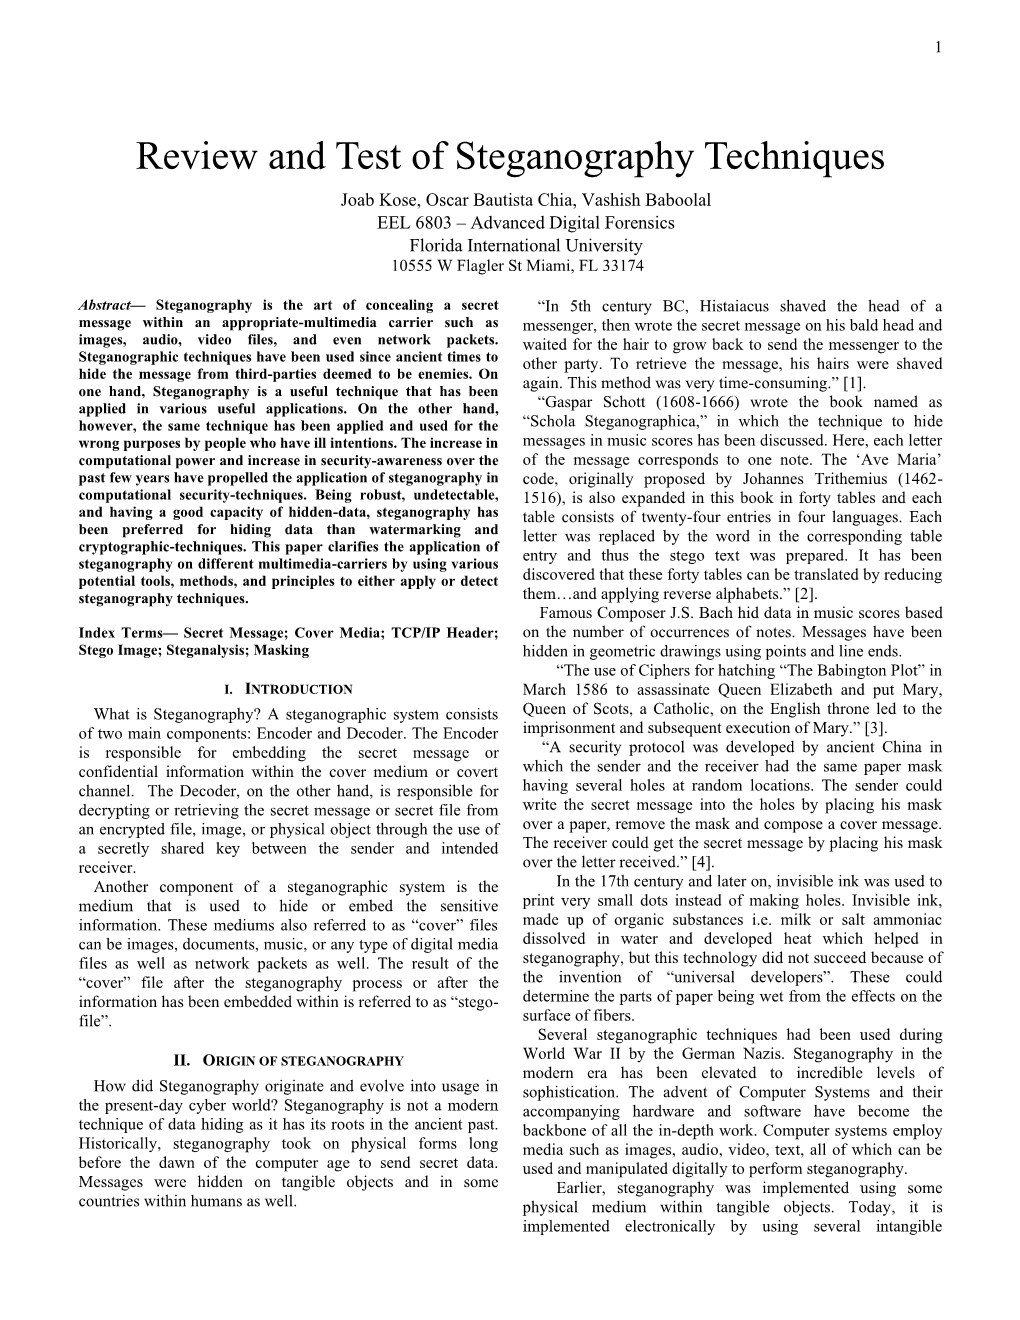 Review and Test of Steganography Techniques